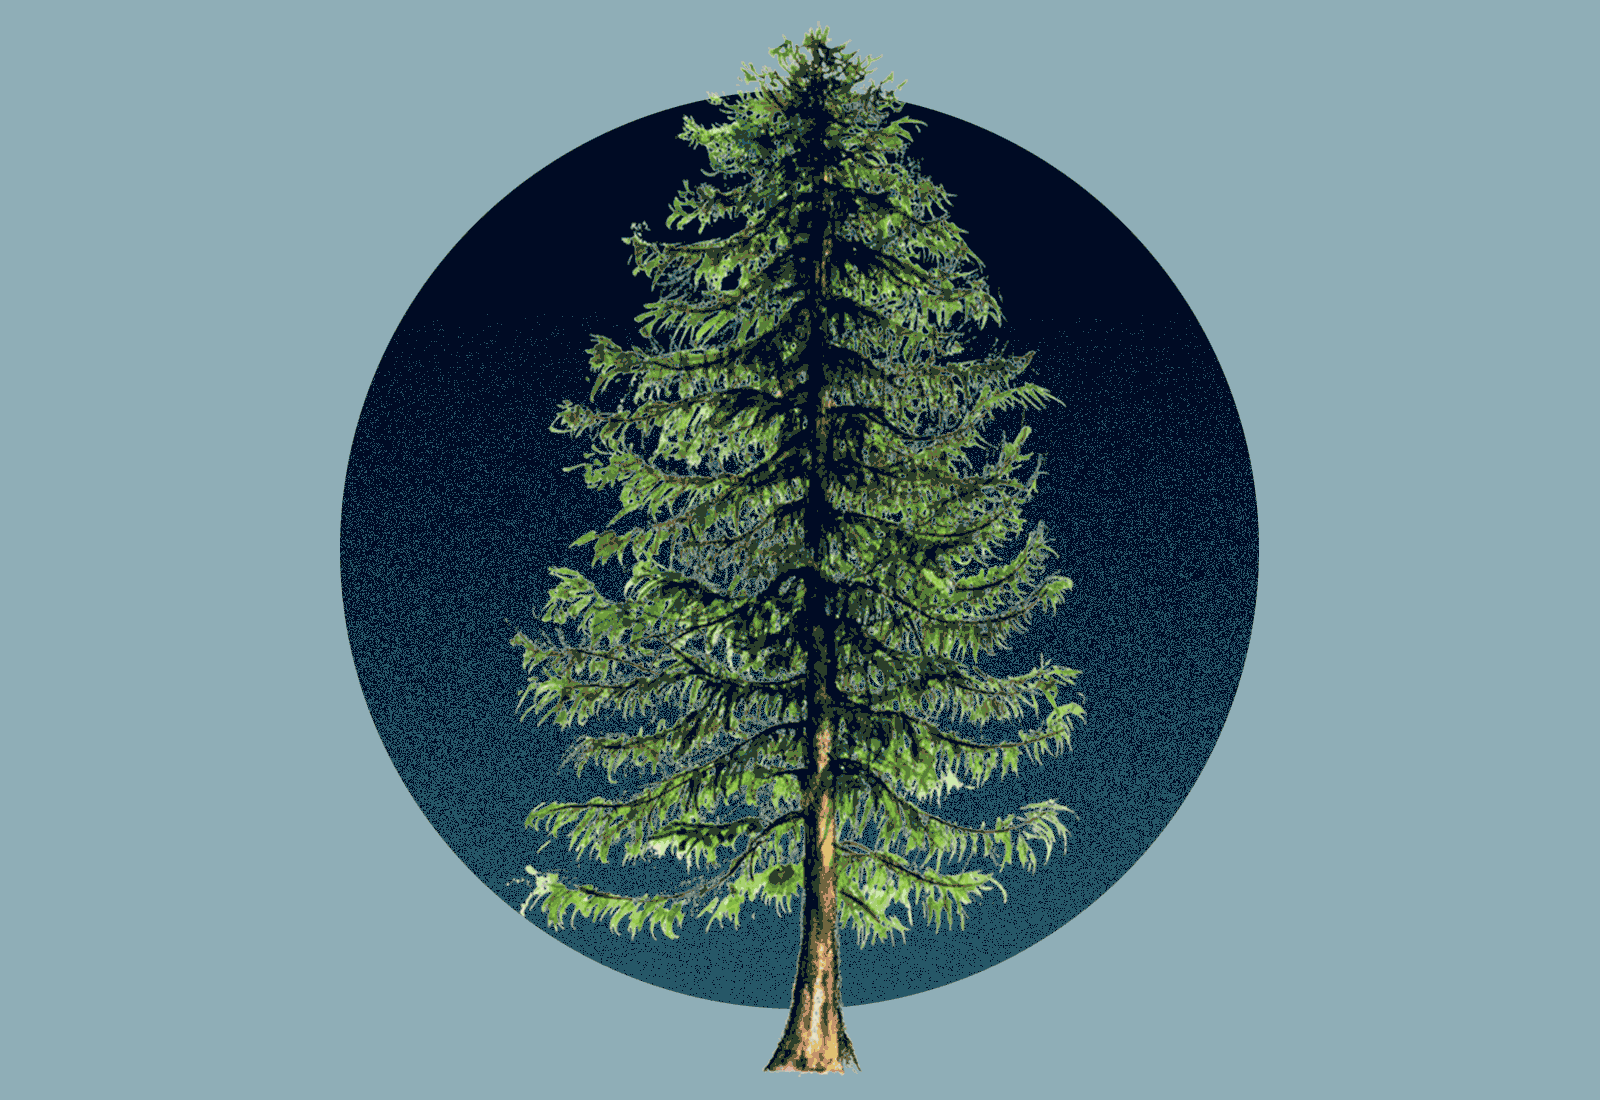 Animation: a healthy hemlock tree being overtaken by insects, fading into a dead hemlock tree